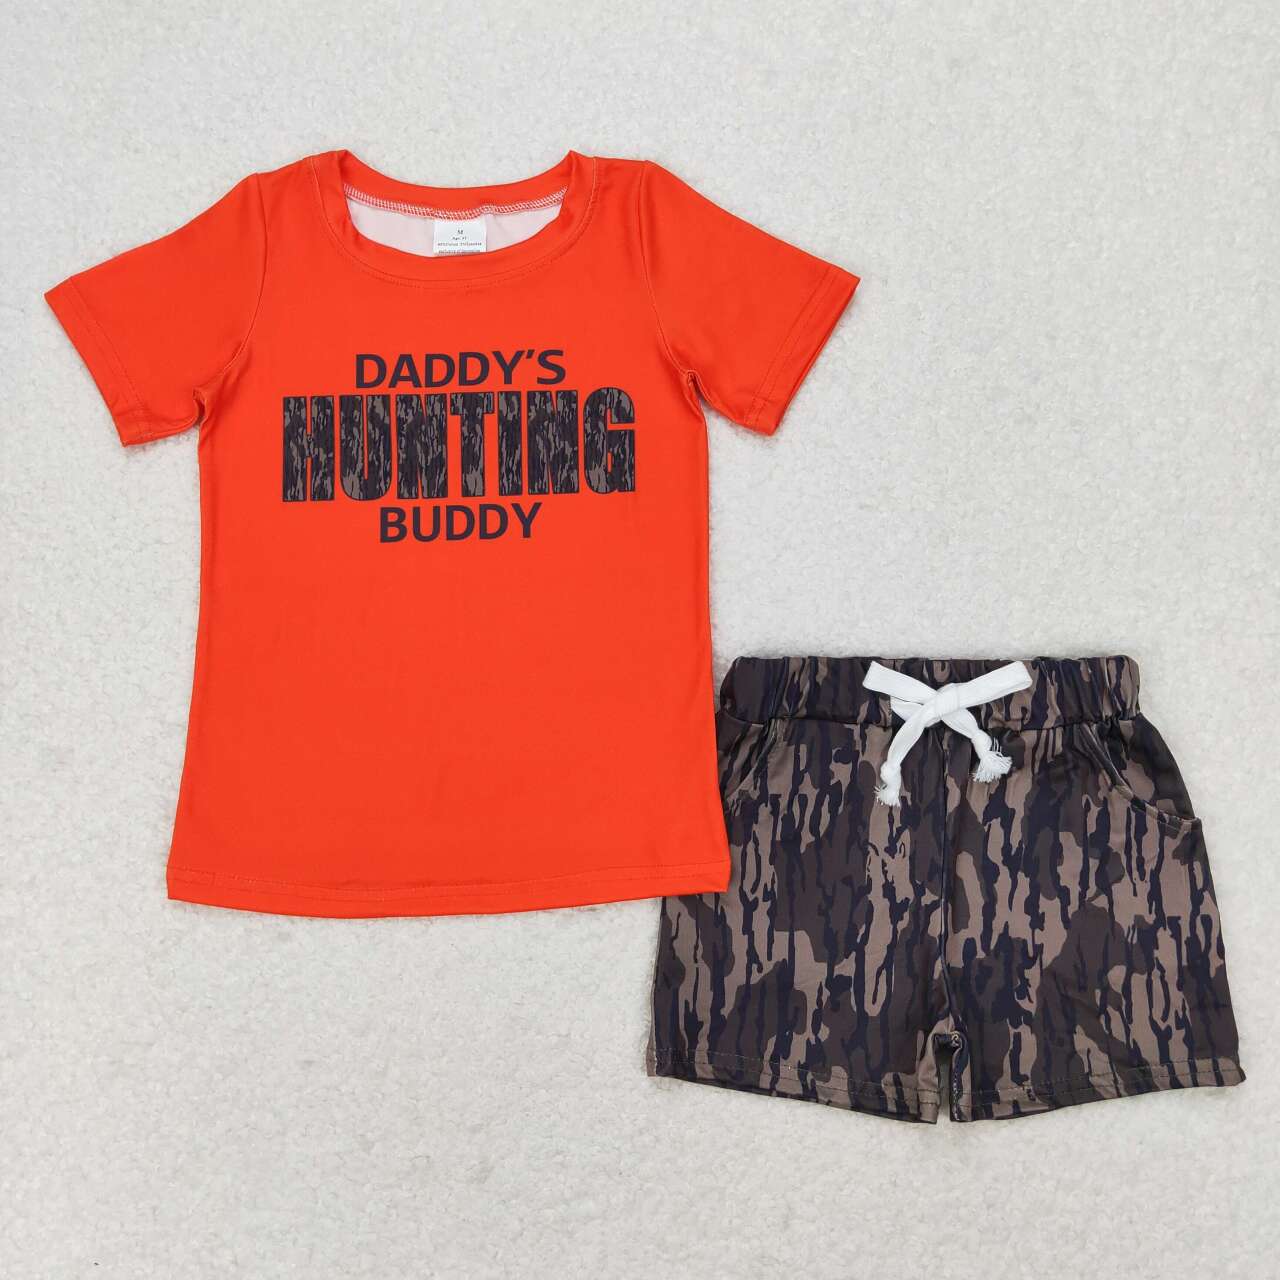 BSSO0922 Daddy's Hunting Buddy Top Camo Shorts Boys Summer Clothes Set